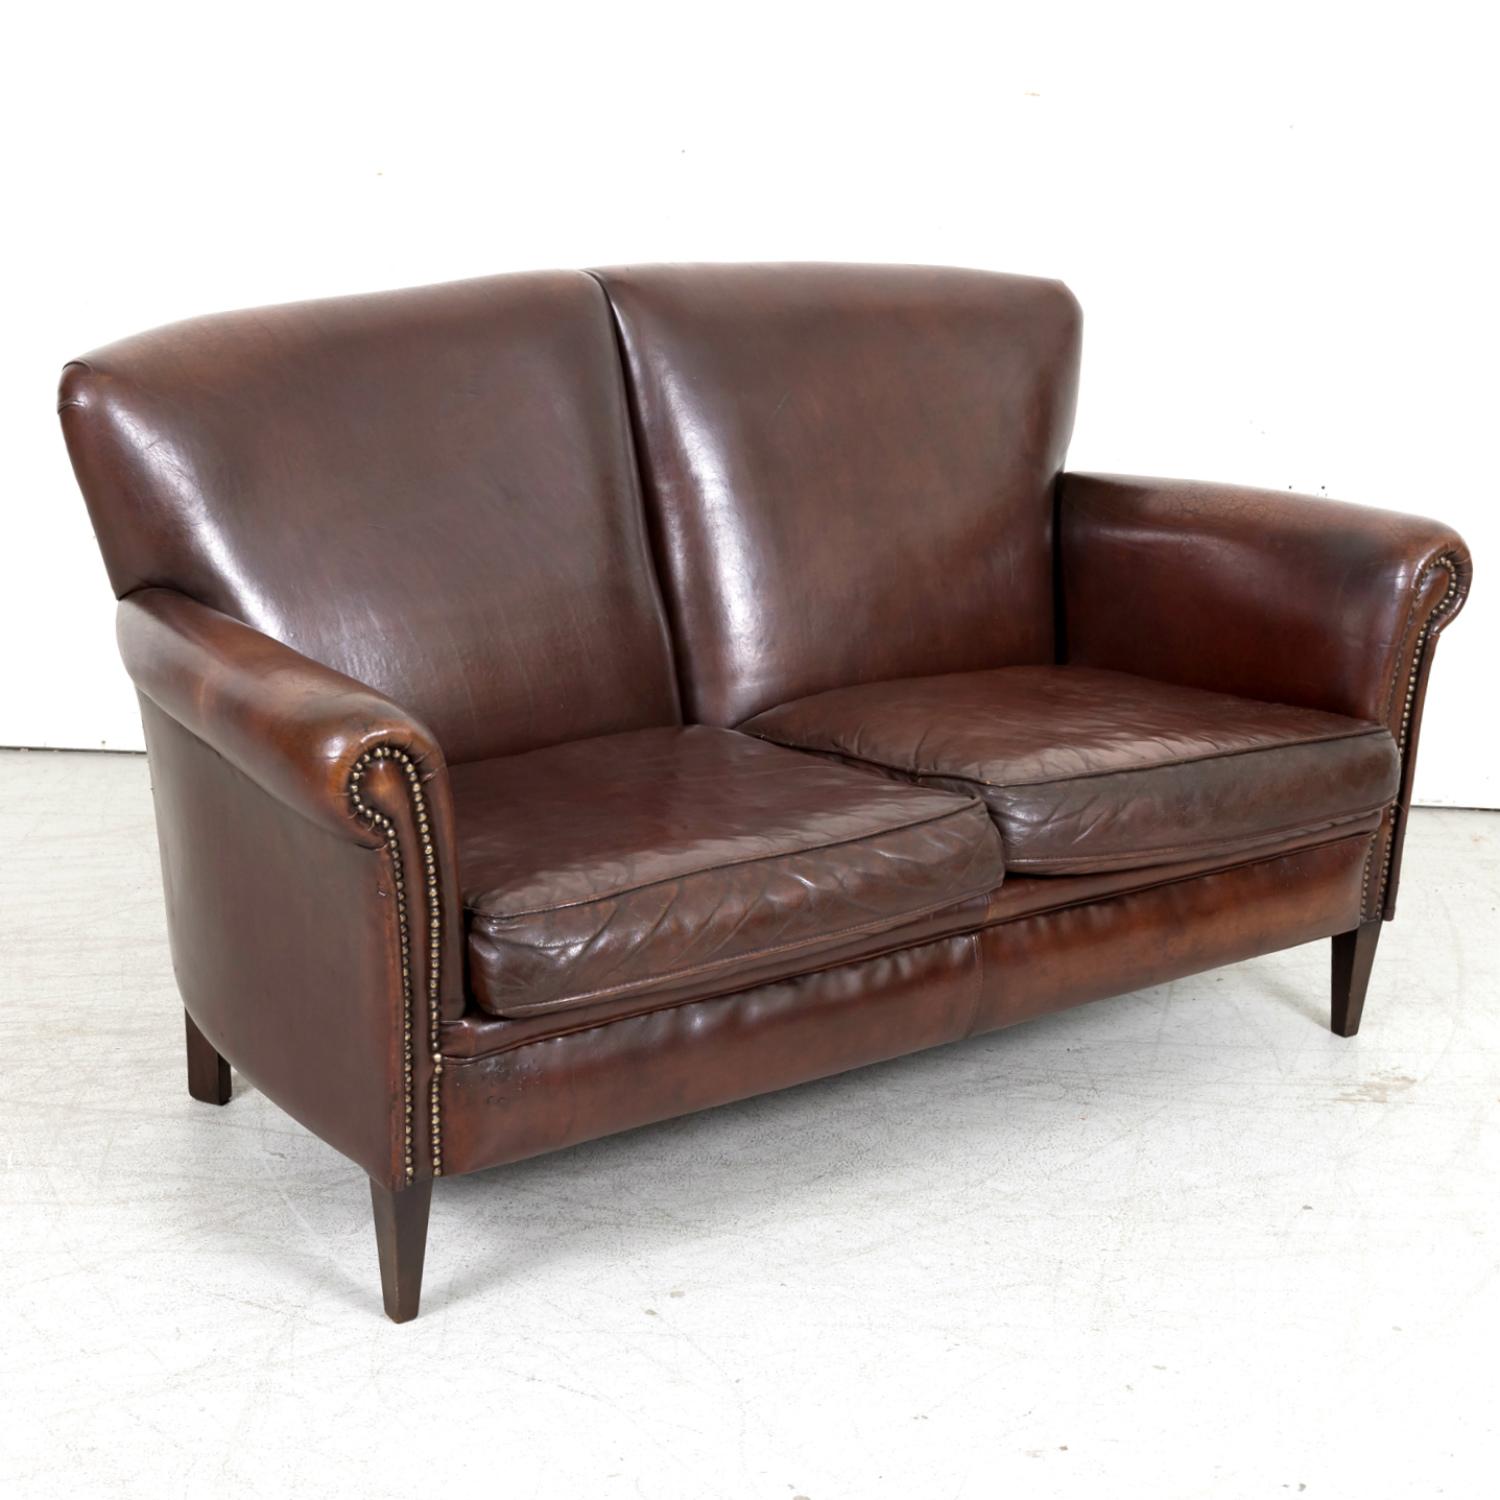 20th Century French Art Deco Settee or Sofa in Original Dark Brown Leather In Good Condition For Sale In Birmingham, AL